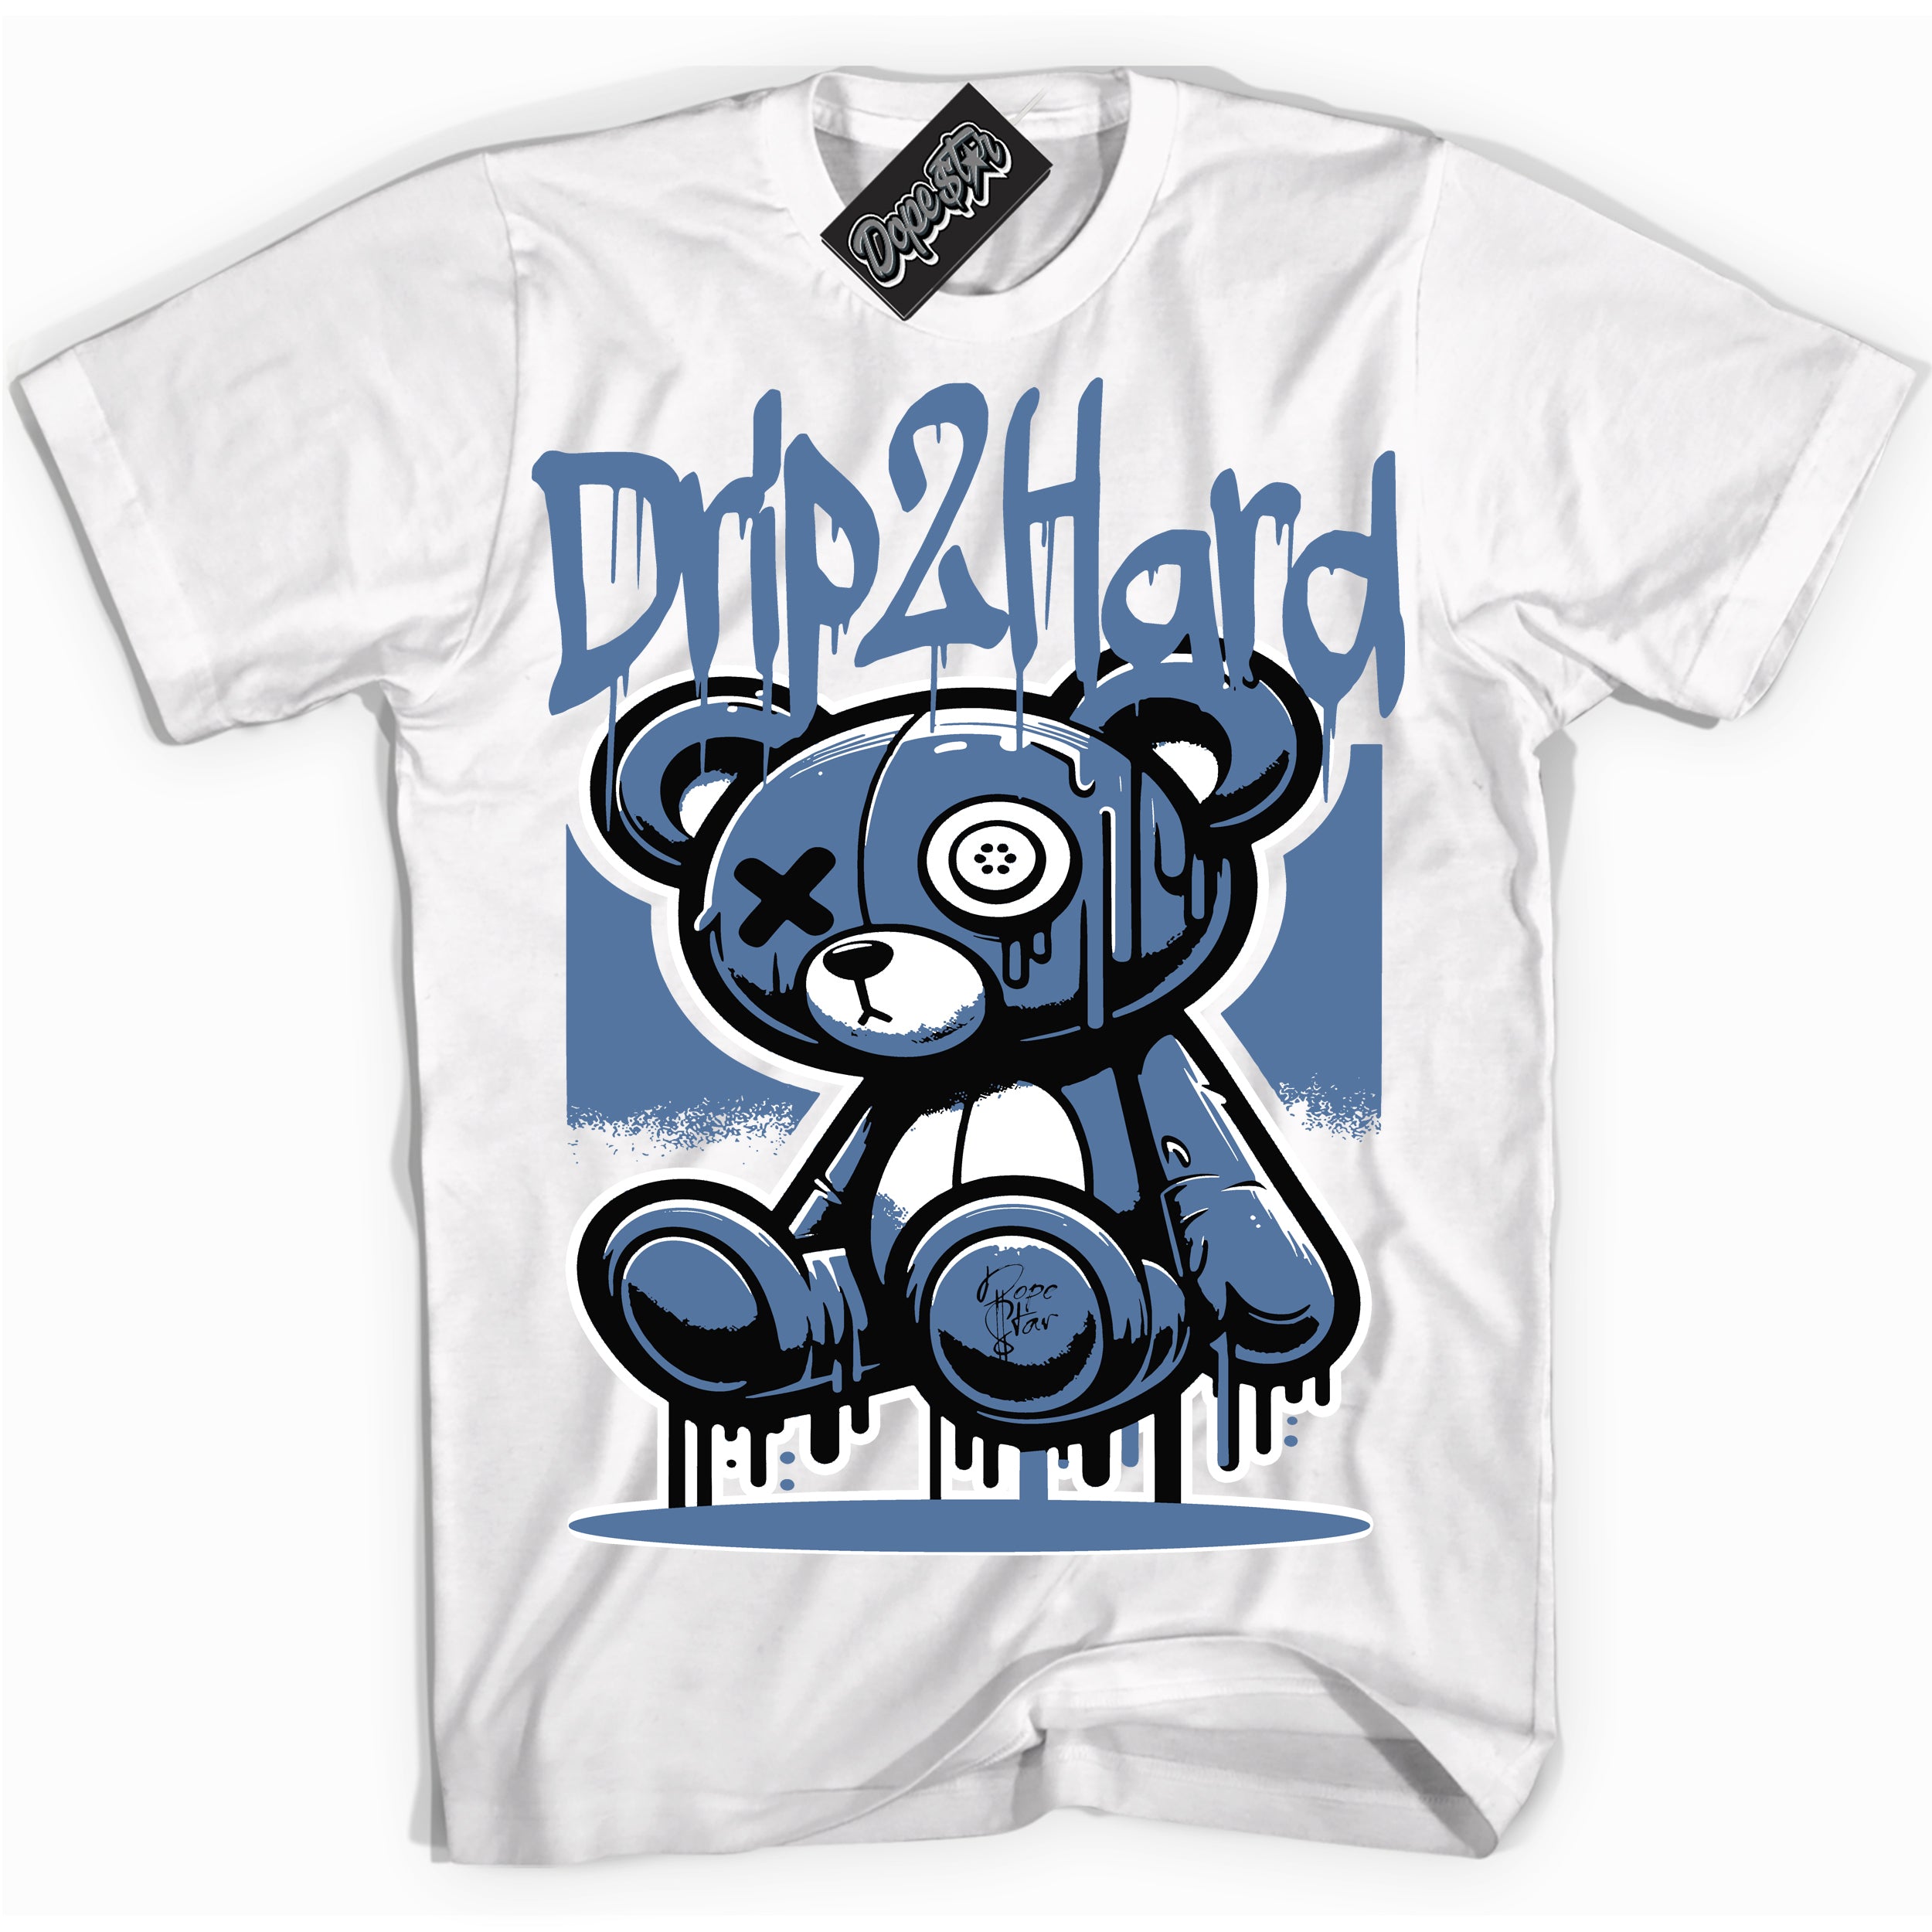 Cool White graphic tee with “ Drip 2 Hard ” design, that perfectly matches Mystic Navy 1s